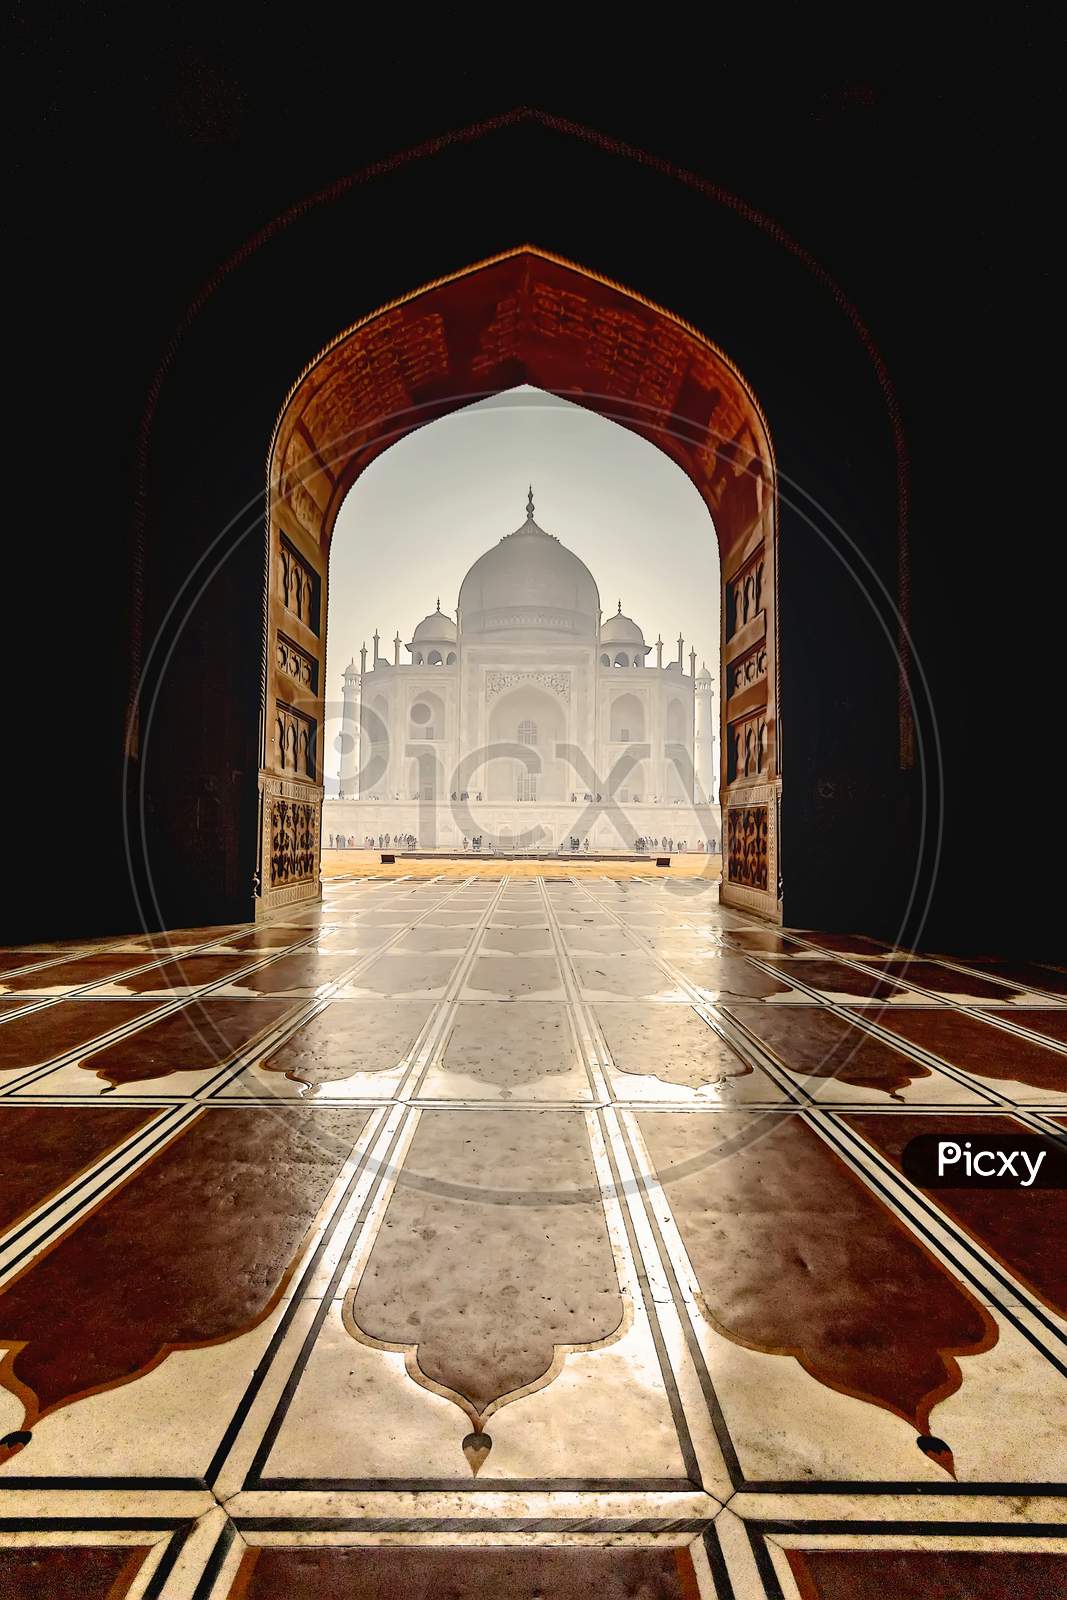 The white marble Taj Mahal building seen from inside the red stone mosque in Agra, India